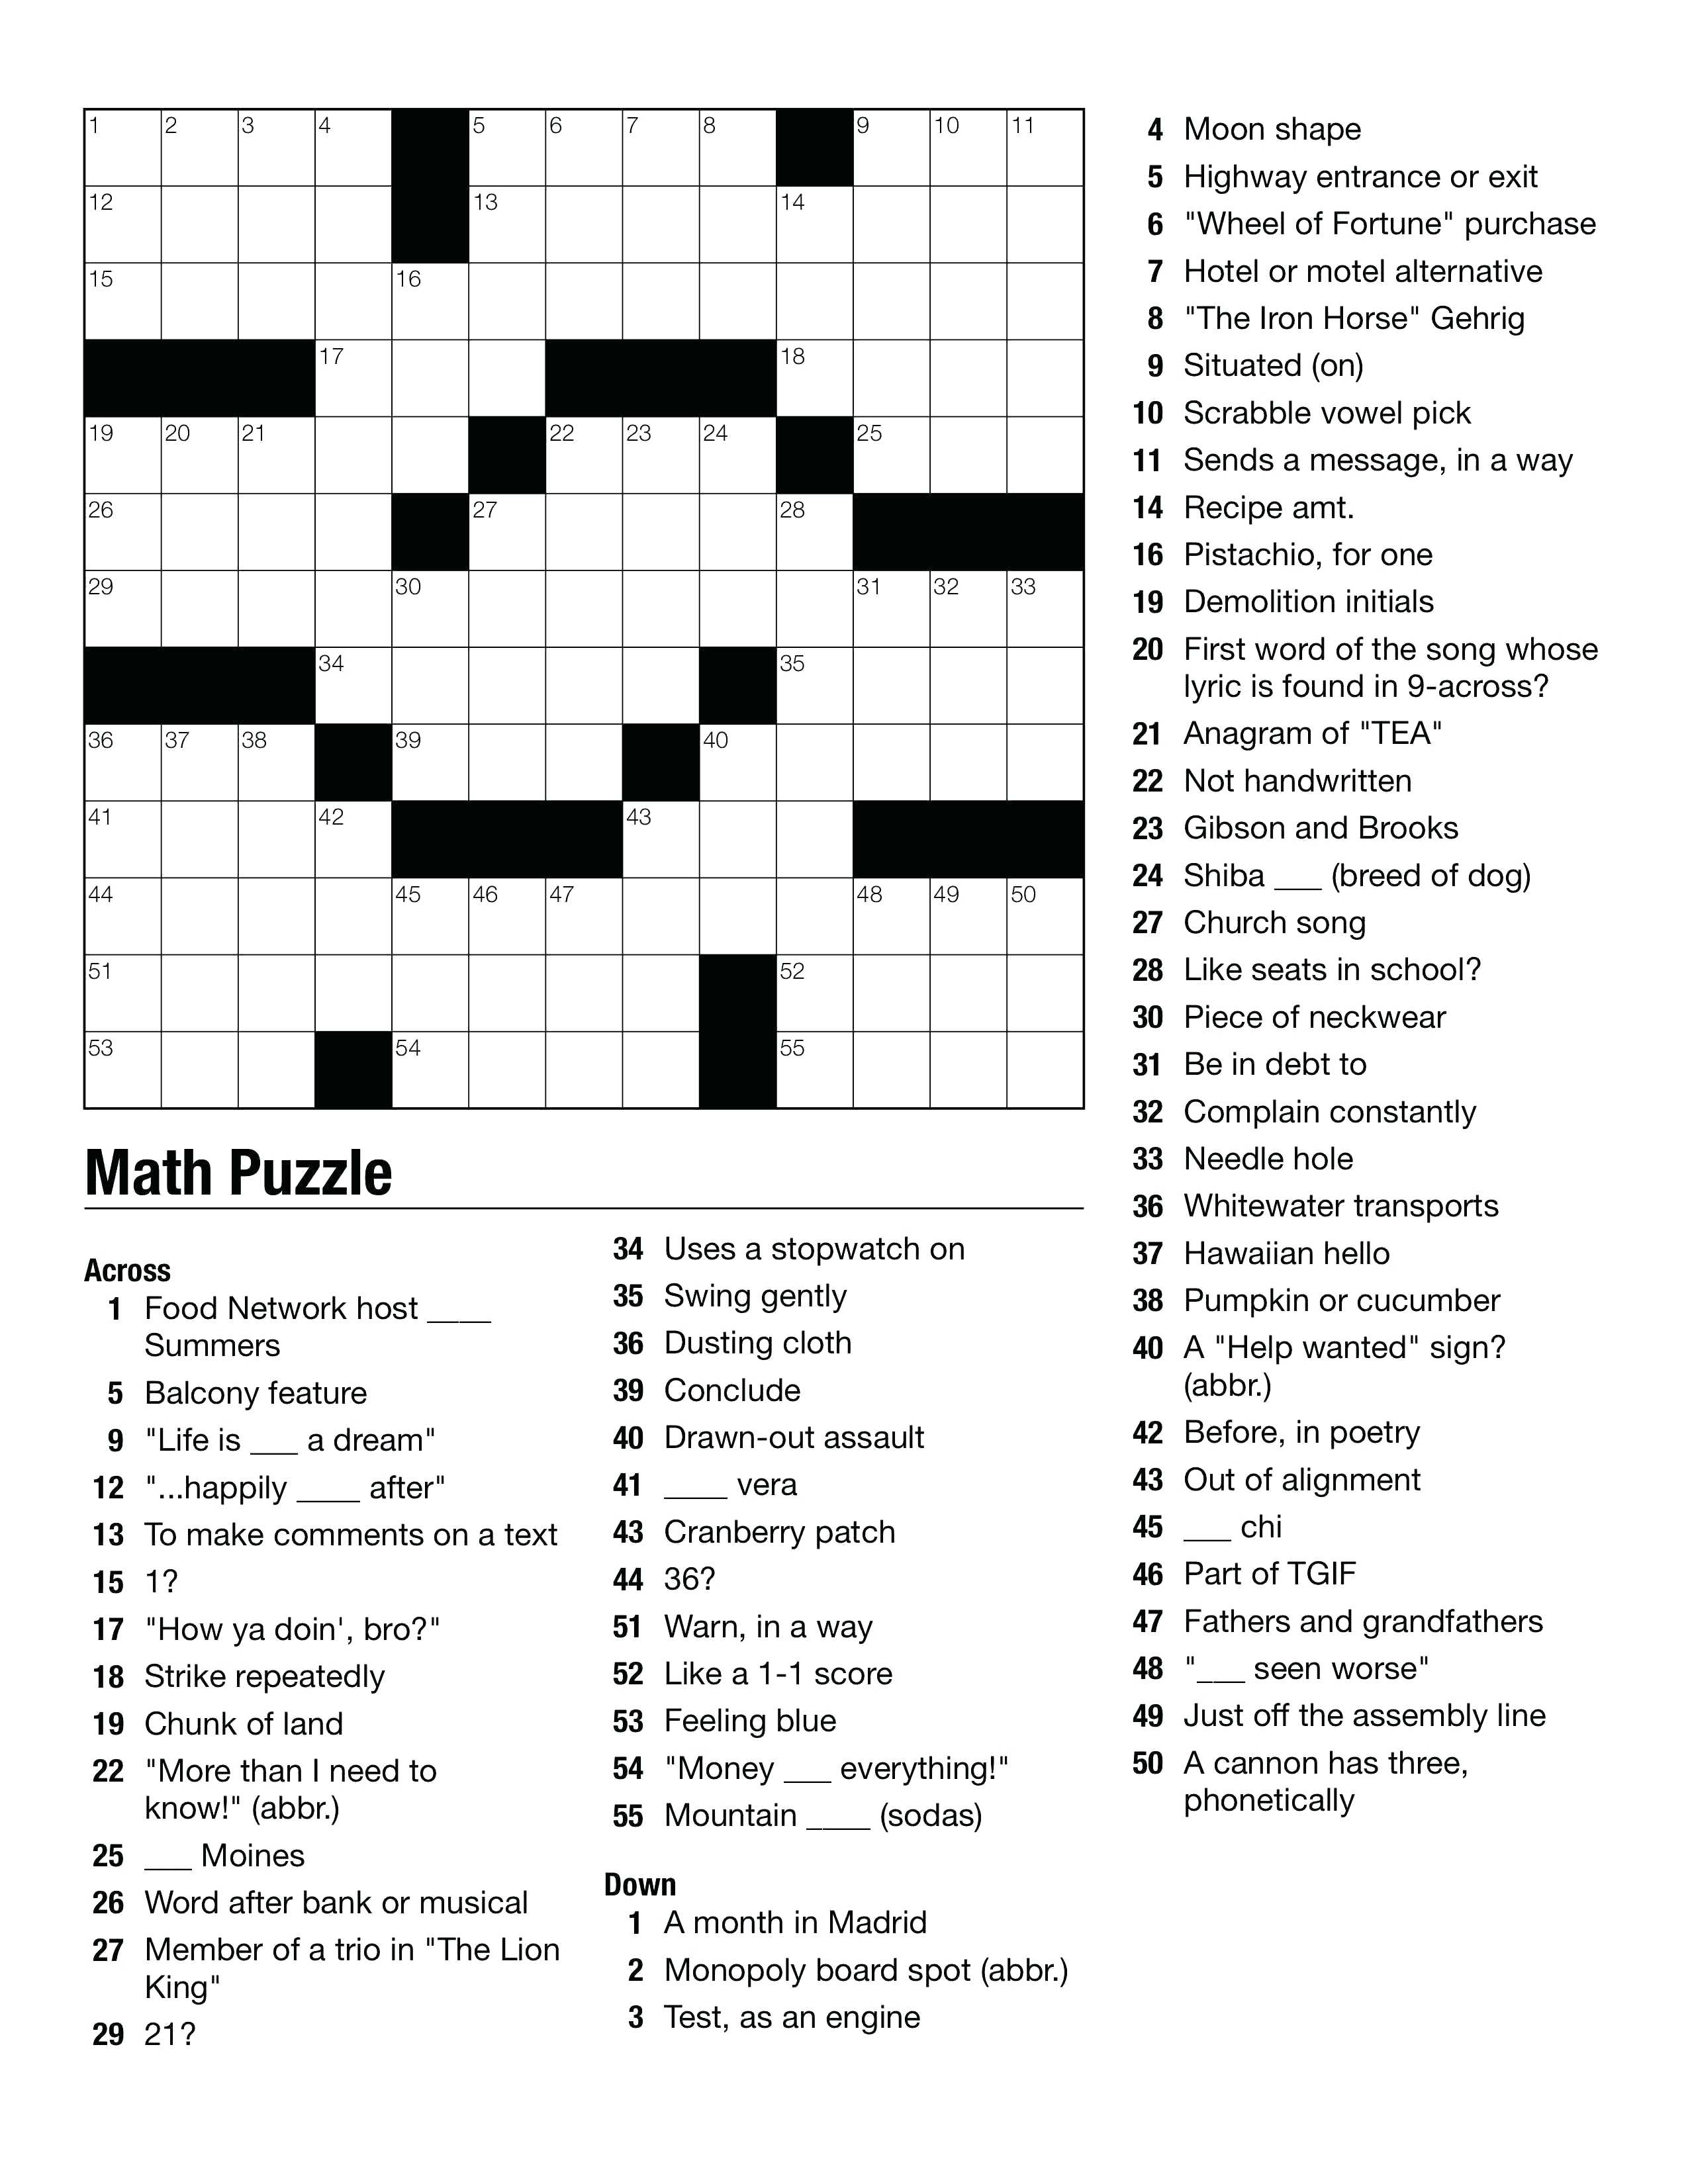 Geometry Puzzles Math Geometry Images Teaching Ideas On Crossword - Crossword Puzzle Printable High School